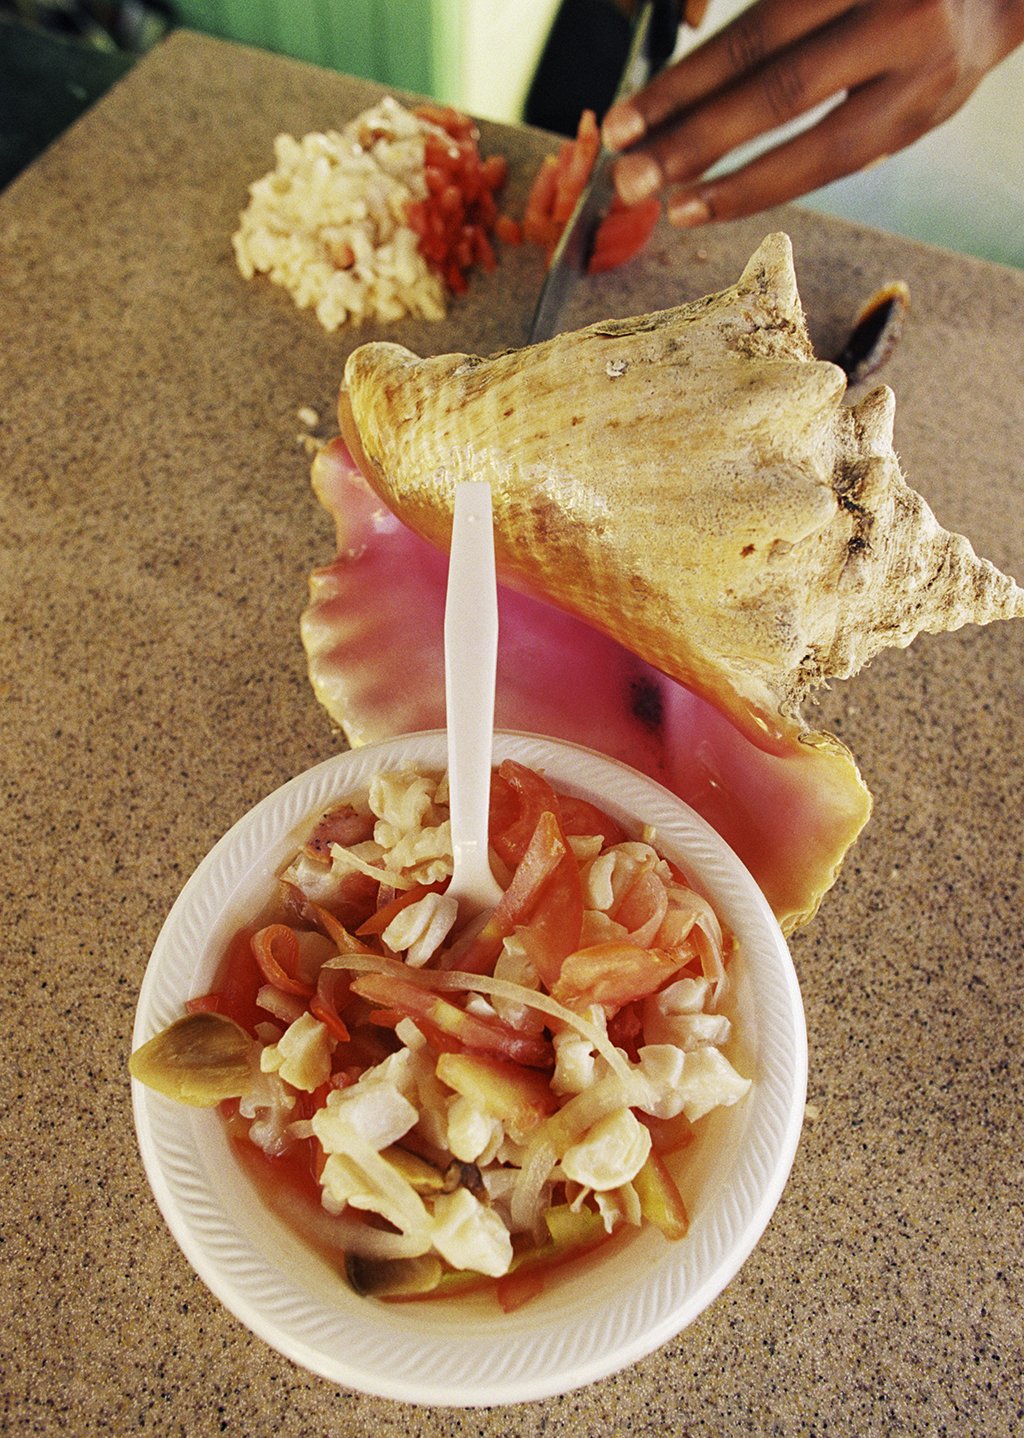 Conch ceviche at the Fish Fry in Nassau. Photograph by Gary Moss/Getty Images.